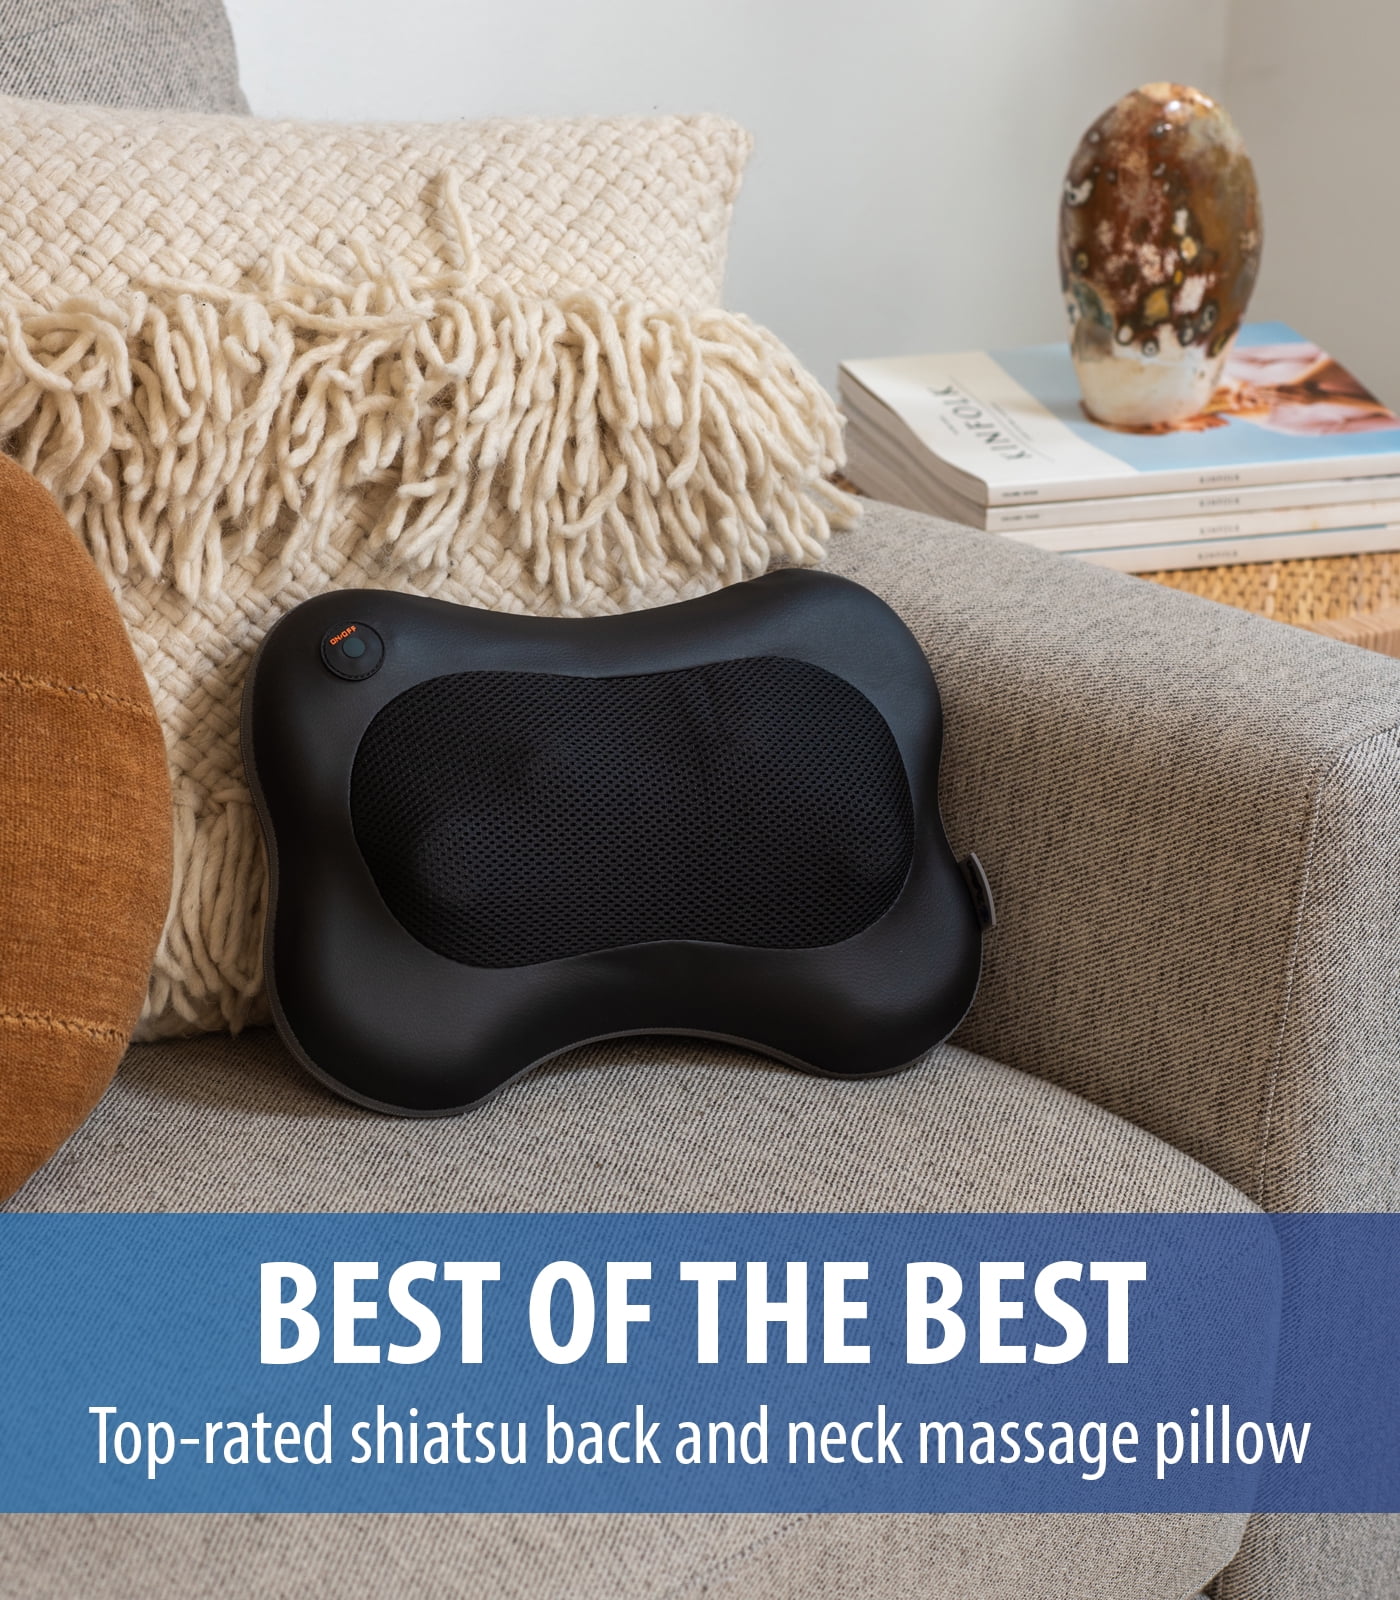  Zyllion Shiatsu Neck and Back Massager - 3D Kneading Deep  Tissue Massage with Heat for Shoulders, Legs, Feet and Muscle Pain Relief -  Black (ZMA-28-BK) : Health & Household